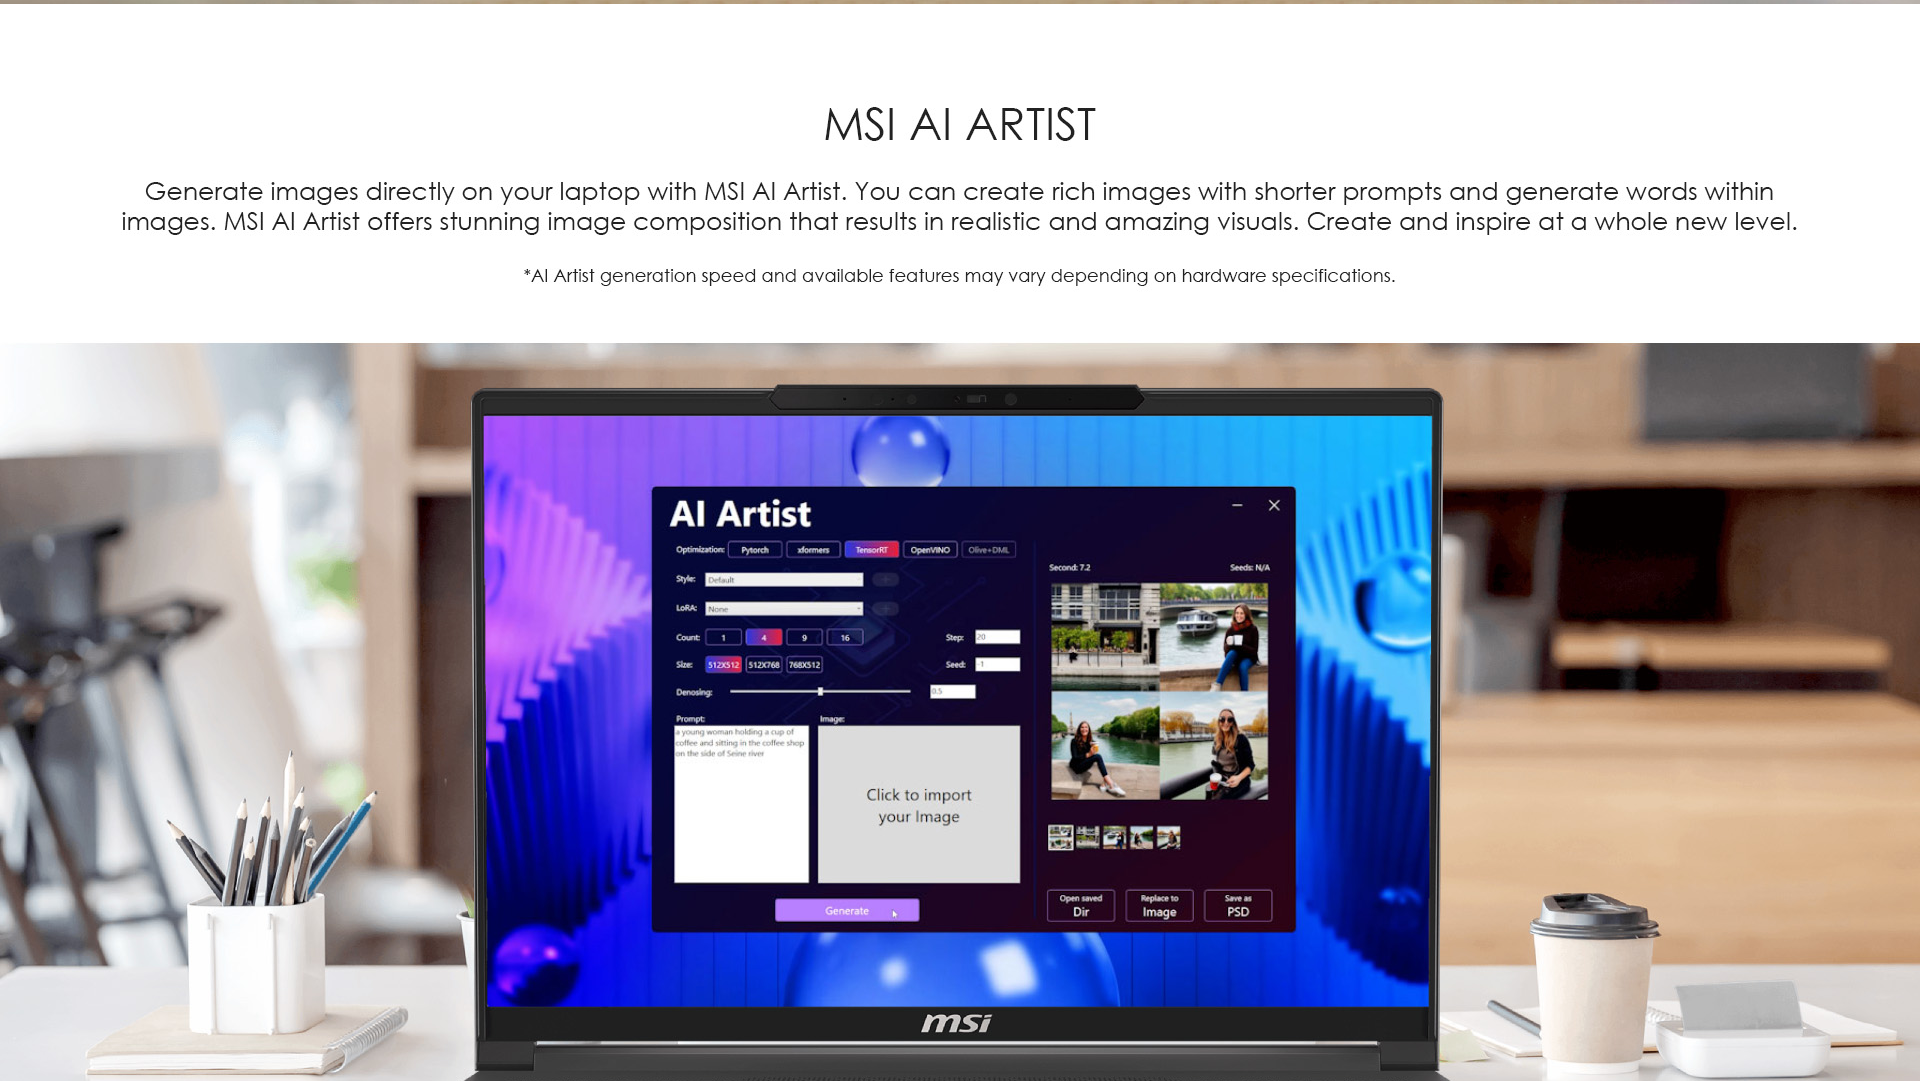 Generate images directly on your laptop with MSI AI Artist. You can create rich images with shorter prompts and generate words within images. MSI AI Artist offers stunning image composition that results in realistic and amazing visuals. Create and inspire at a whole new level.